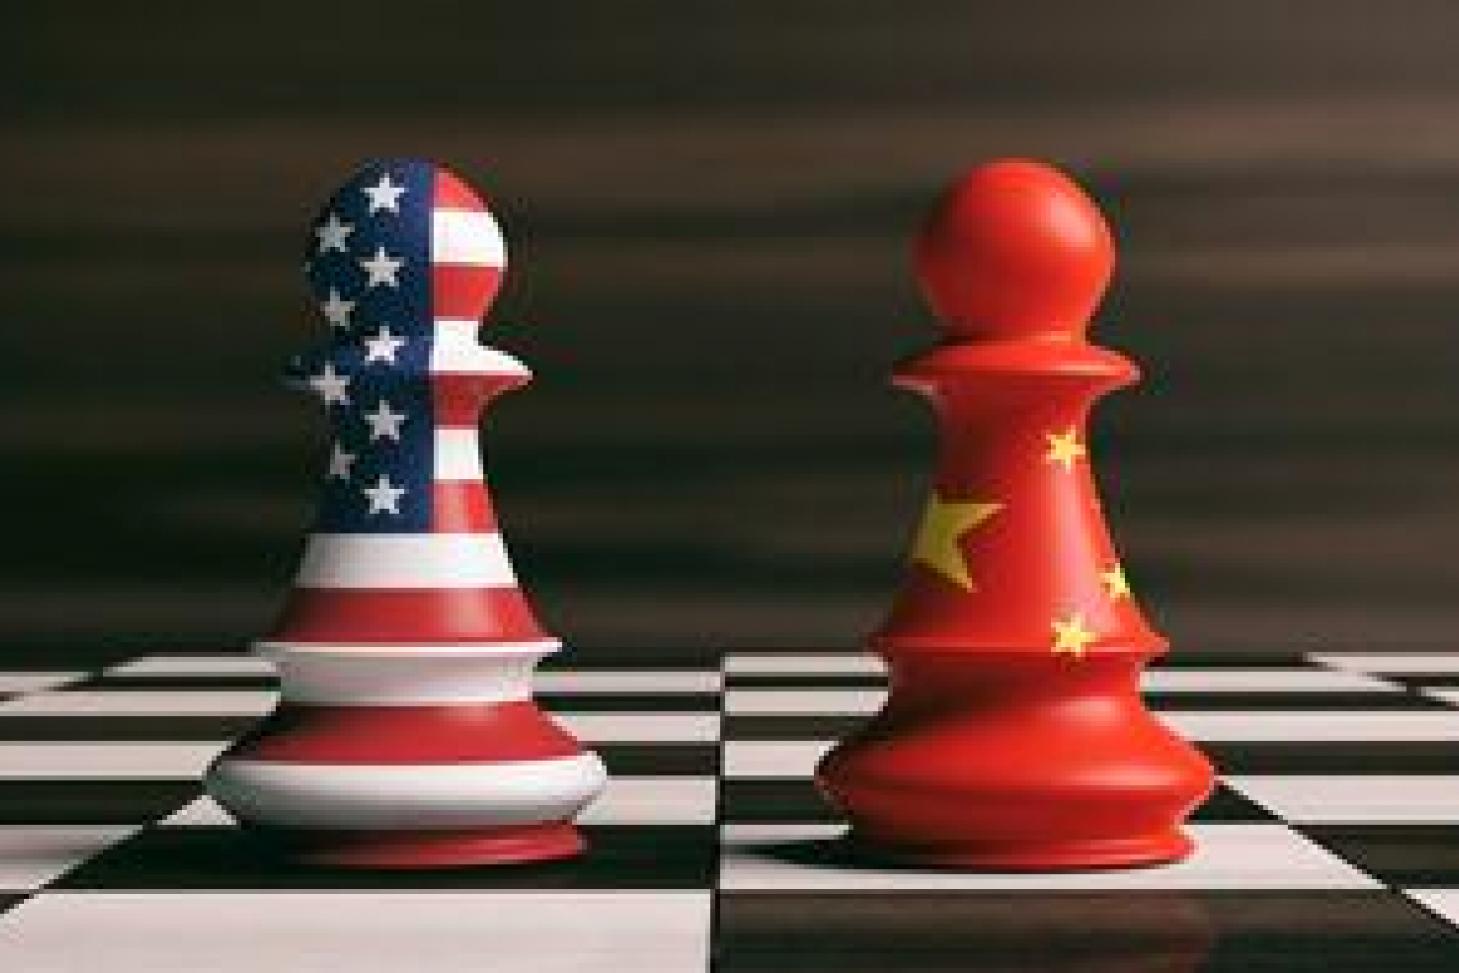 Two chess pieces, one with an American flag and one with a Chinese flag